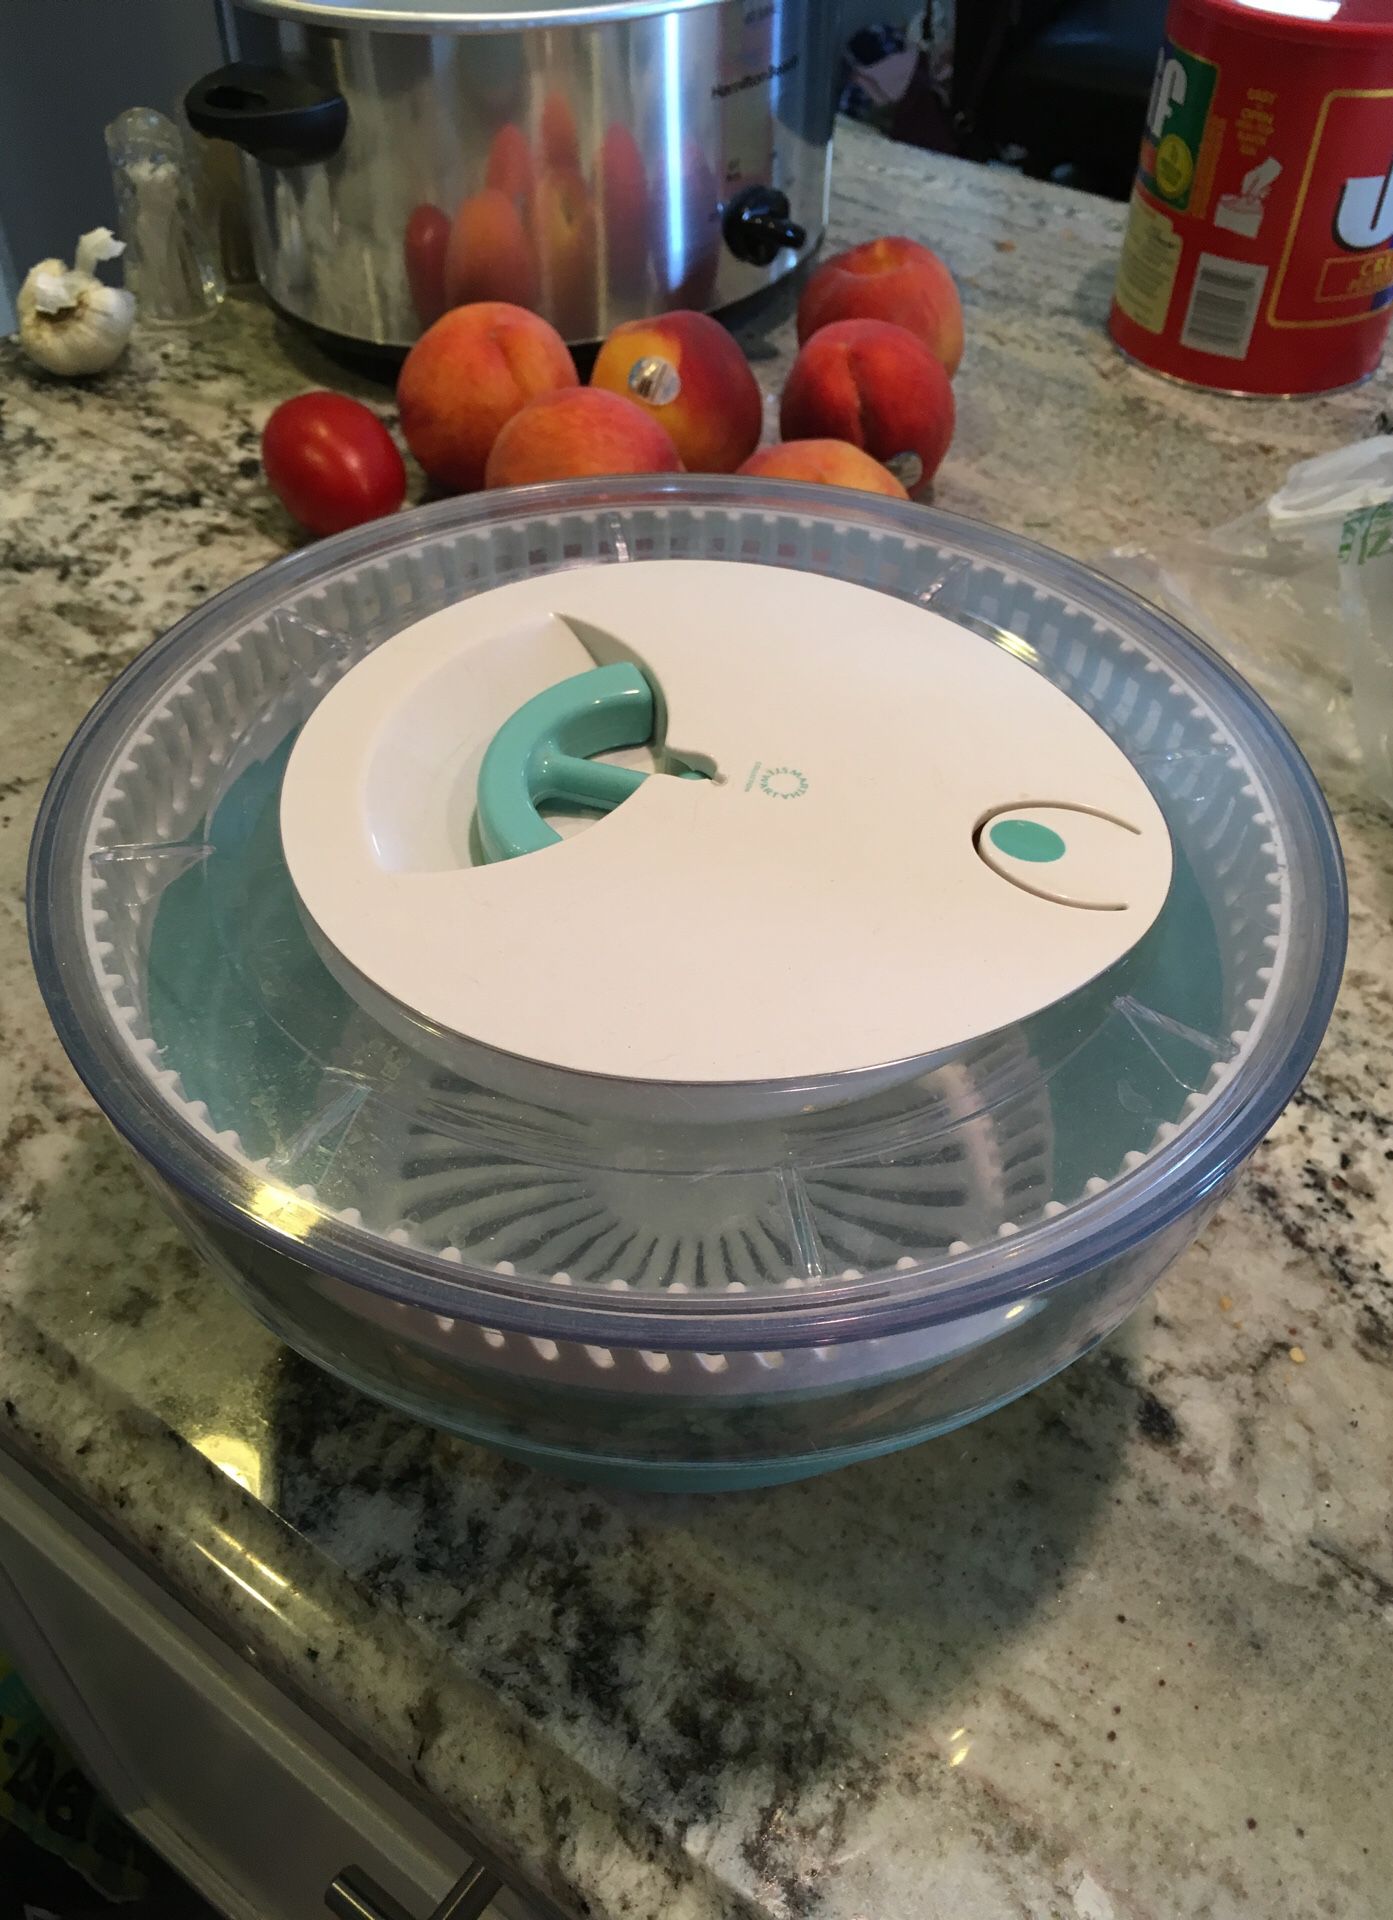 MARTHA MOMENTS: Domestic Insight: The Salad Spinner